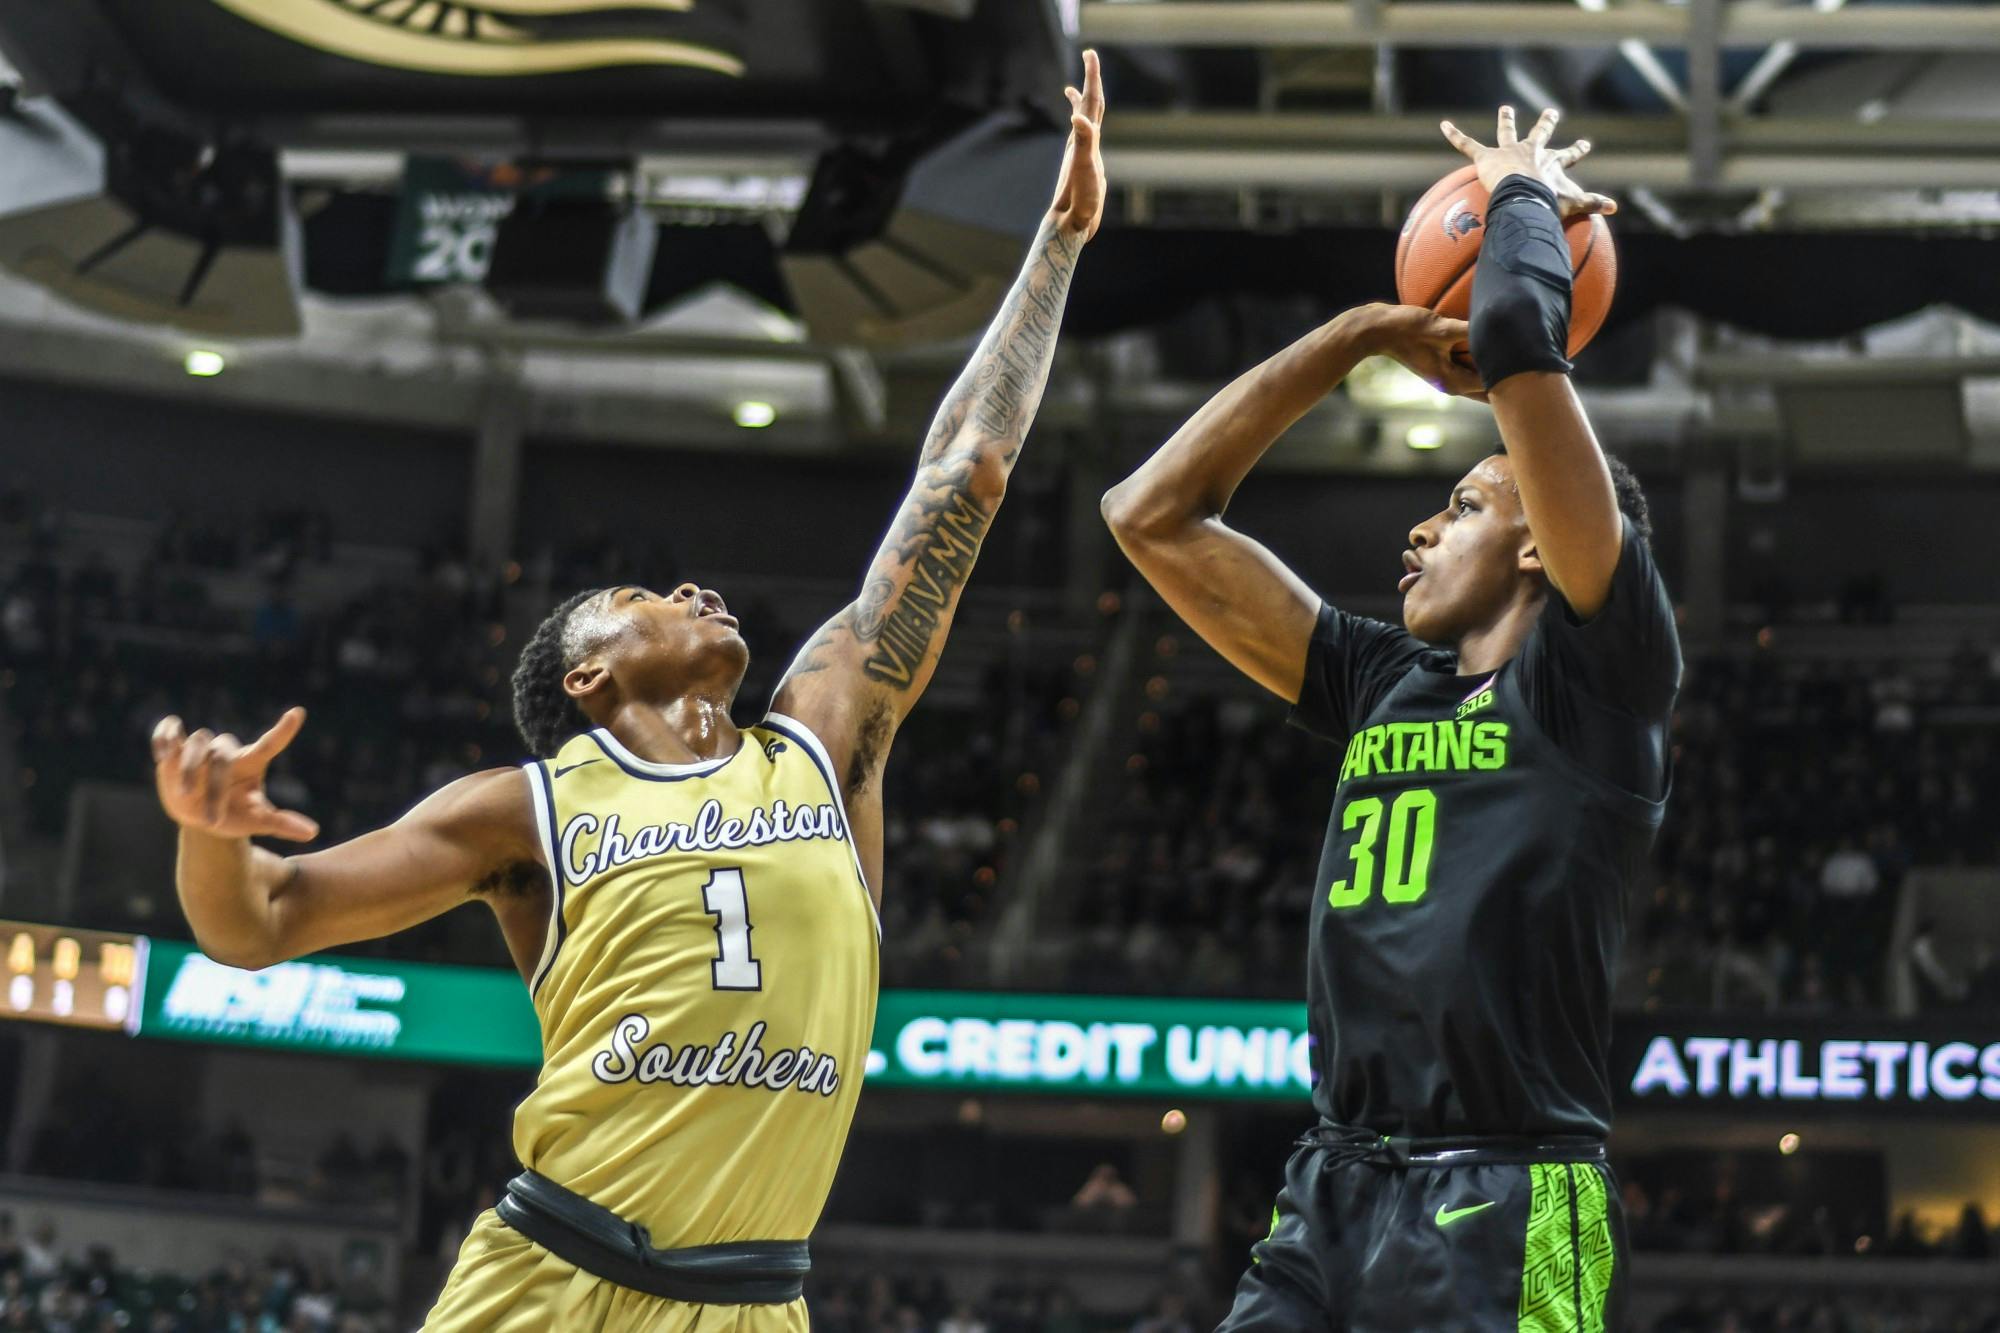 <p>Sophomore forward Marcus Bingham Jr. (30) shoots the ball during the game against the Charleston Southern Buccaneers at Breslin Center on Nov. 18, 2019. The Spartans defeated the Buccaneers, 94-46.</p>